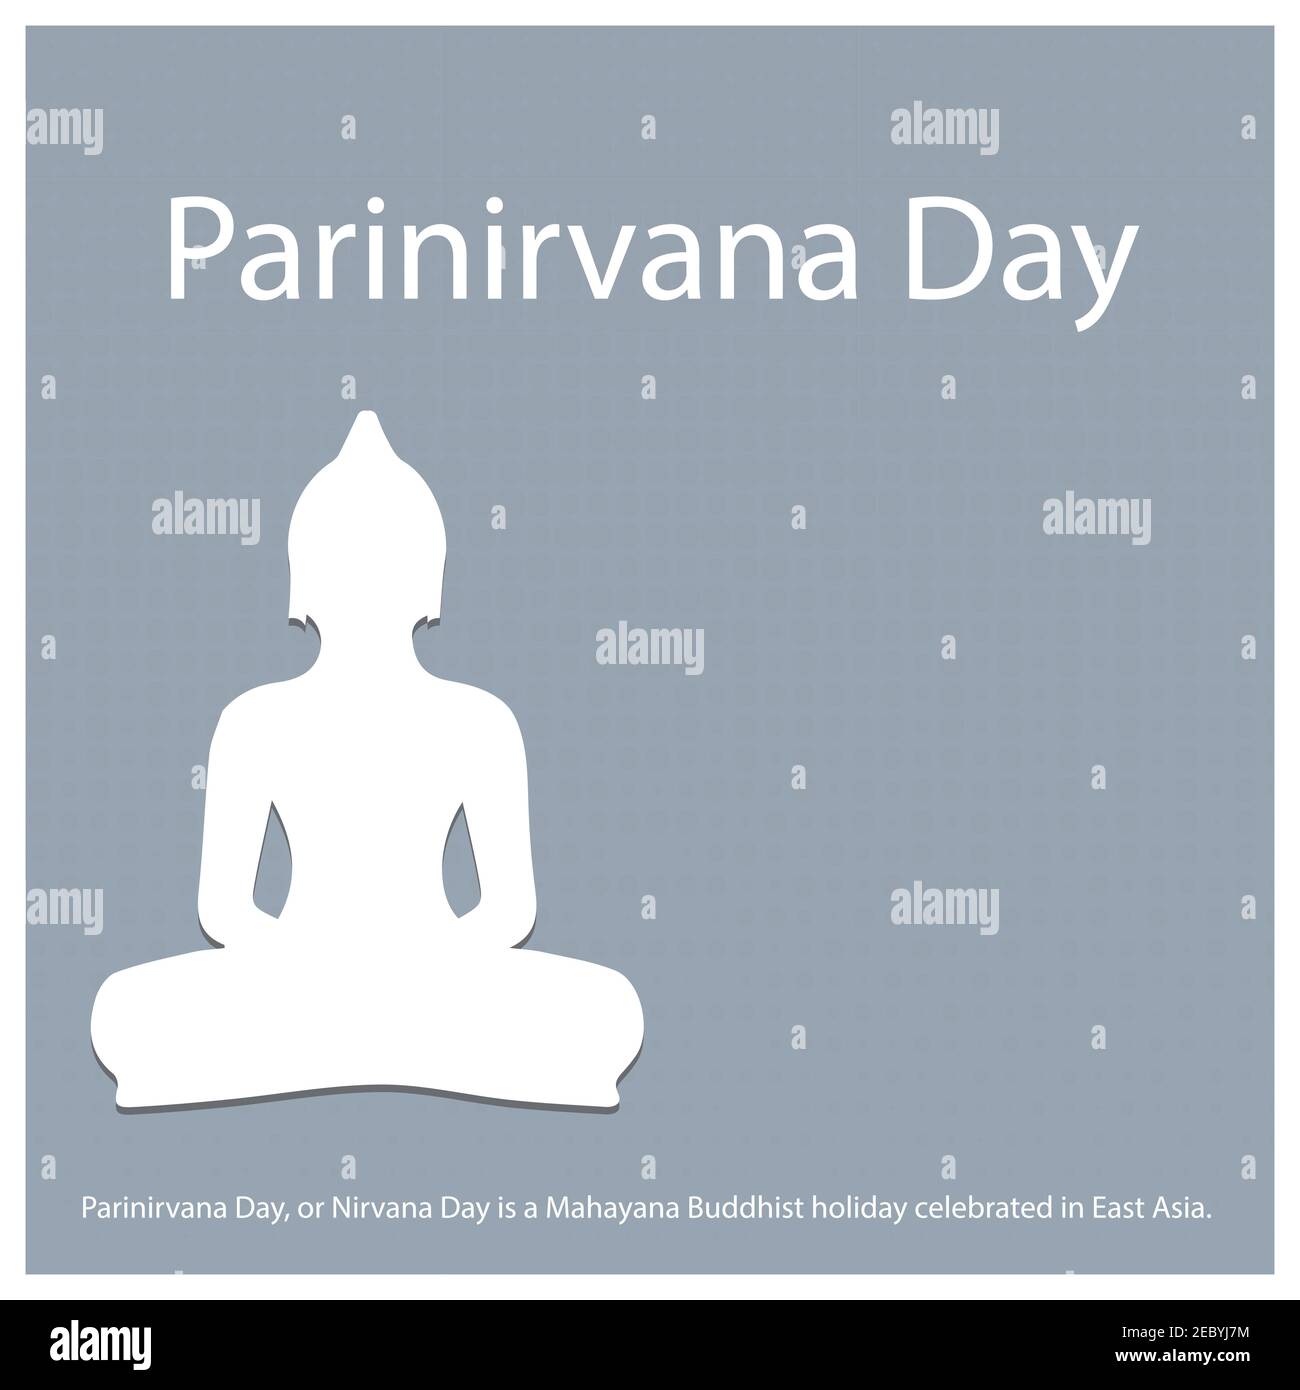 Parinirvana Day, or Nirvana Day is a Mahayana Buddhist holiday celebrated in East Asia. Stock Vector